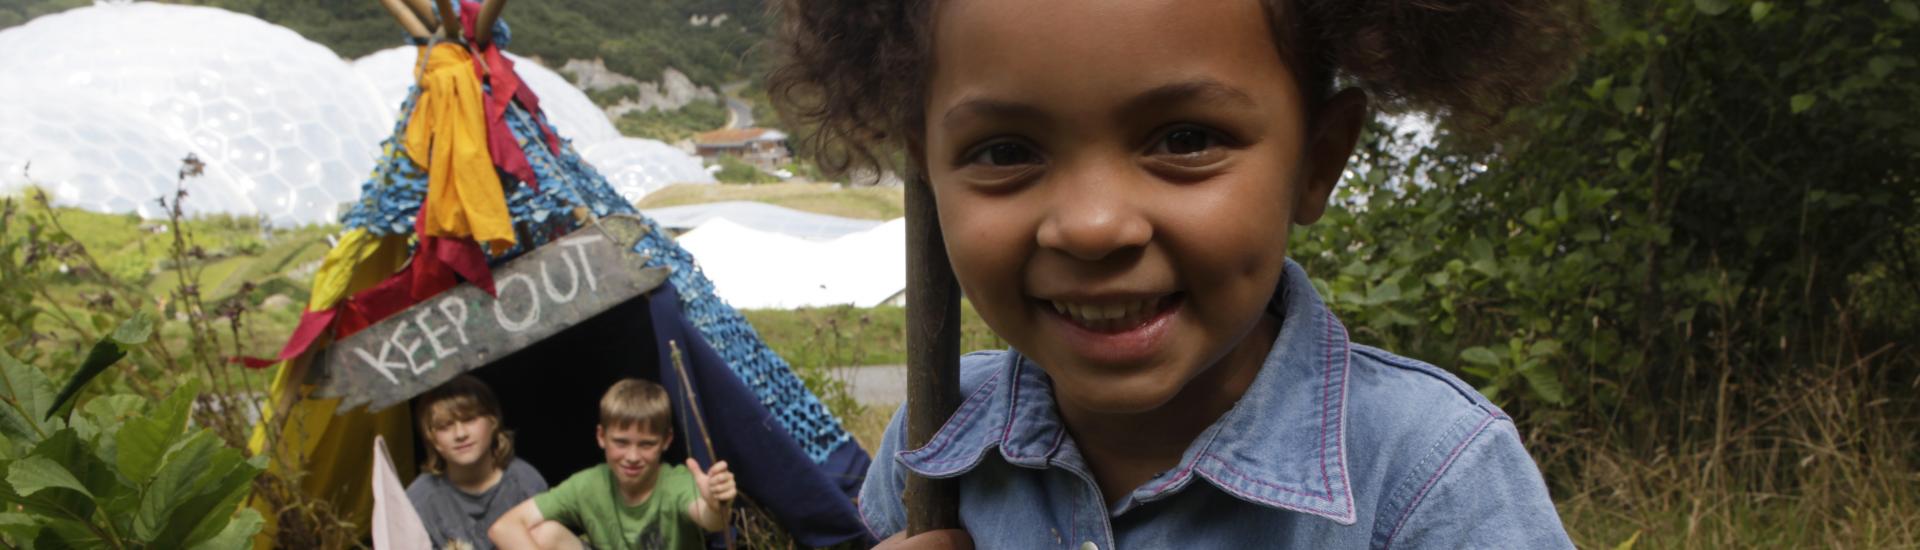 A photograph of two children hiding in a den with the Eden Project in the background and a young girl closer to the camera and holding a stick